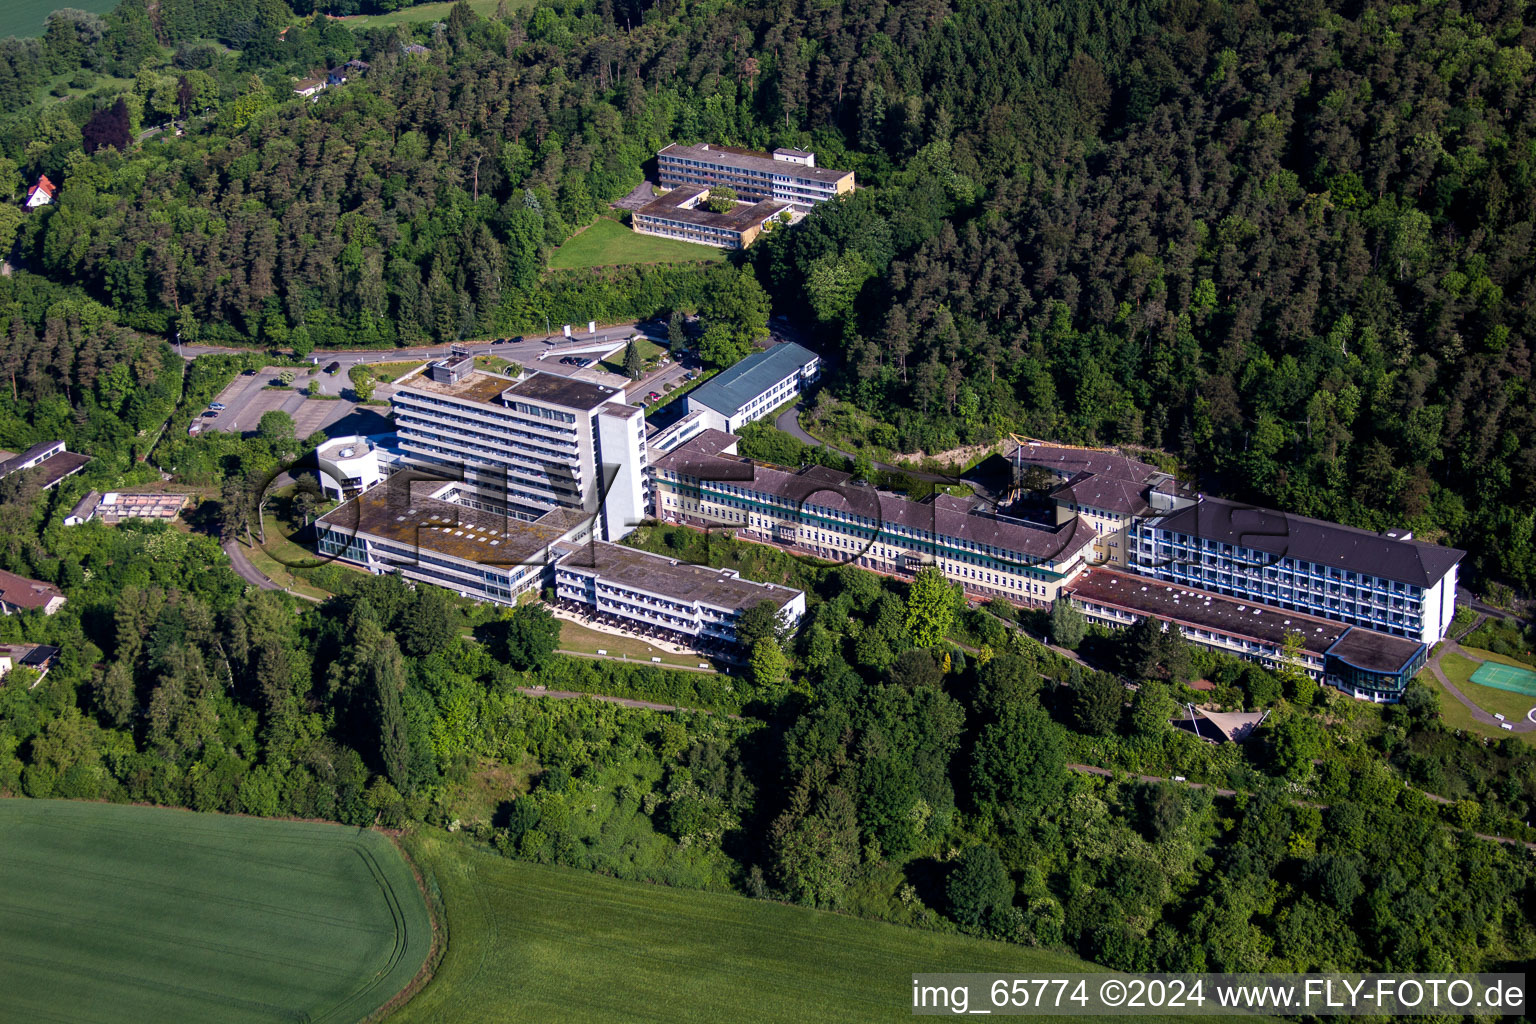 Hospital grounds of the Clinic Asklepios Weserbergland-Klinik in Hoexter in the state North Rhine-Westphalia, Germany